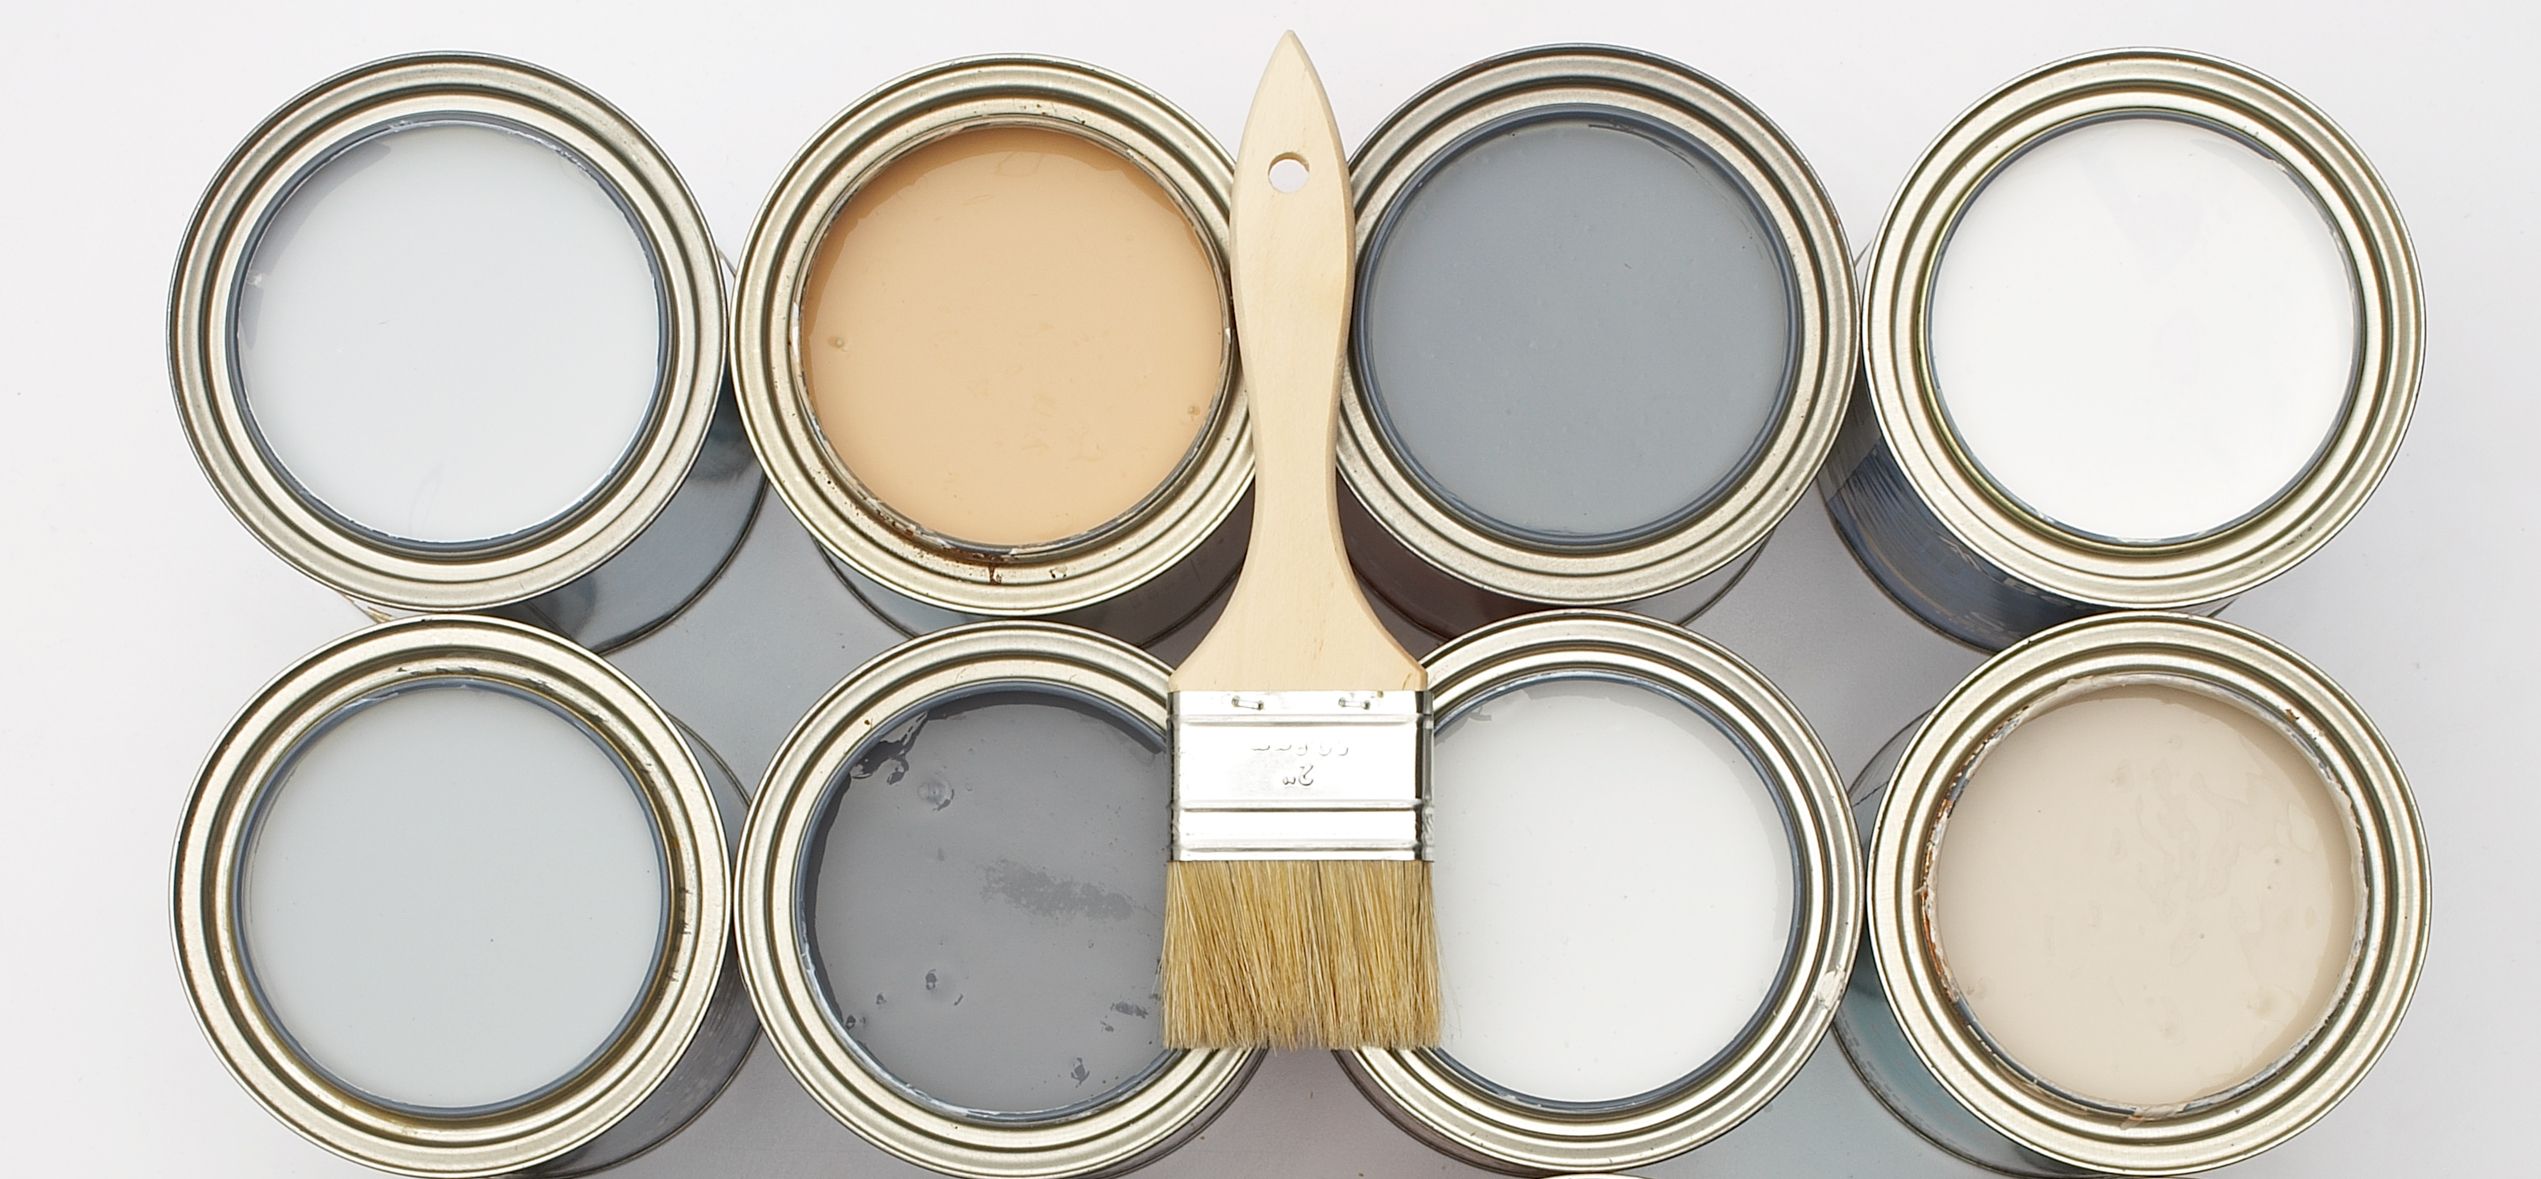 The Best Chalk Paint Brush for Furniture - Semigloss Design